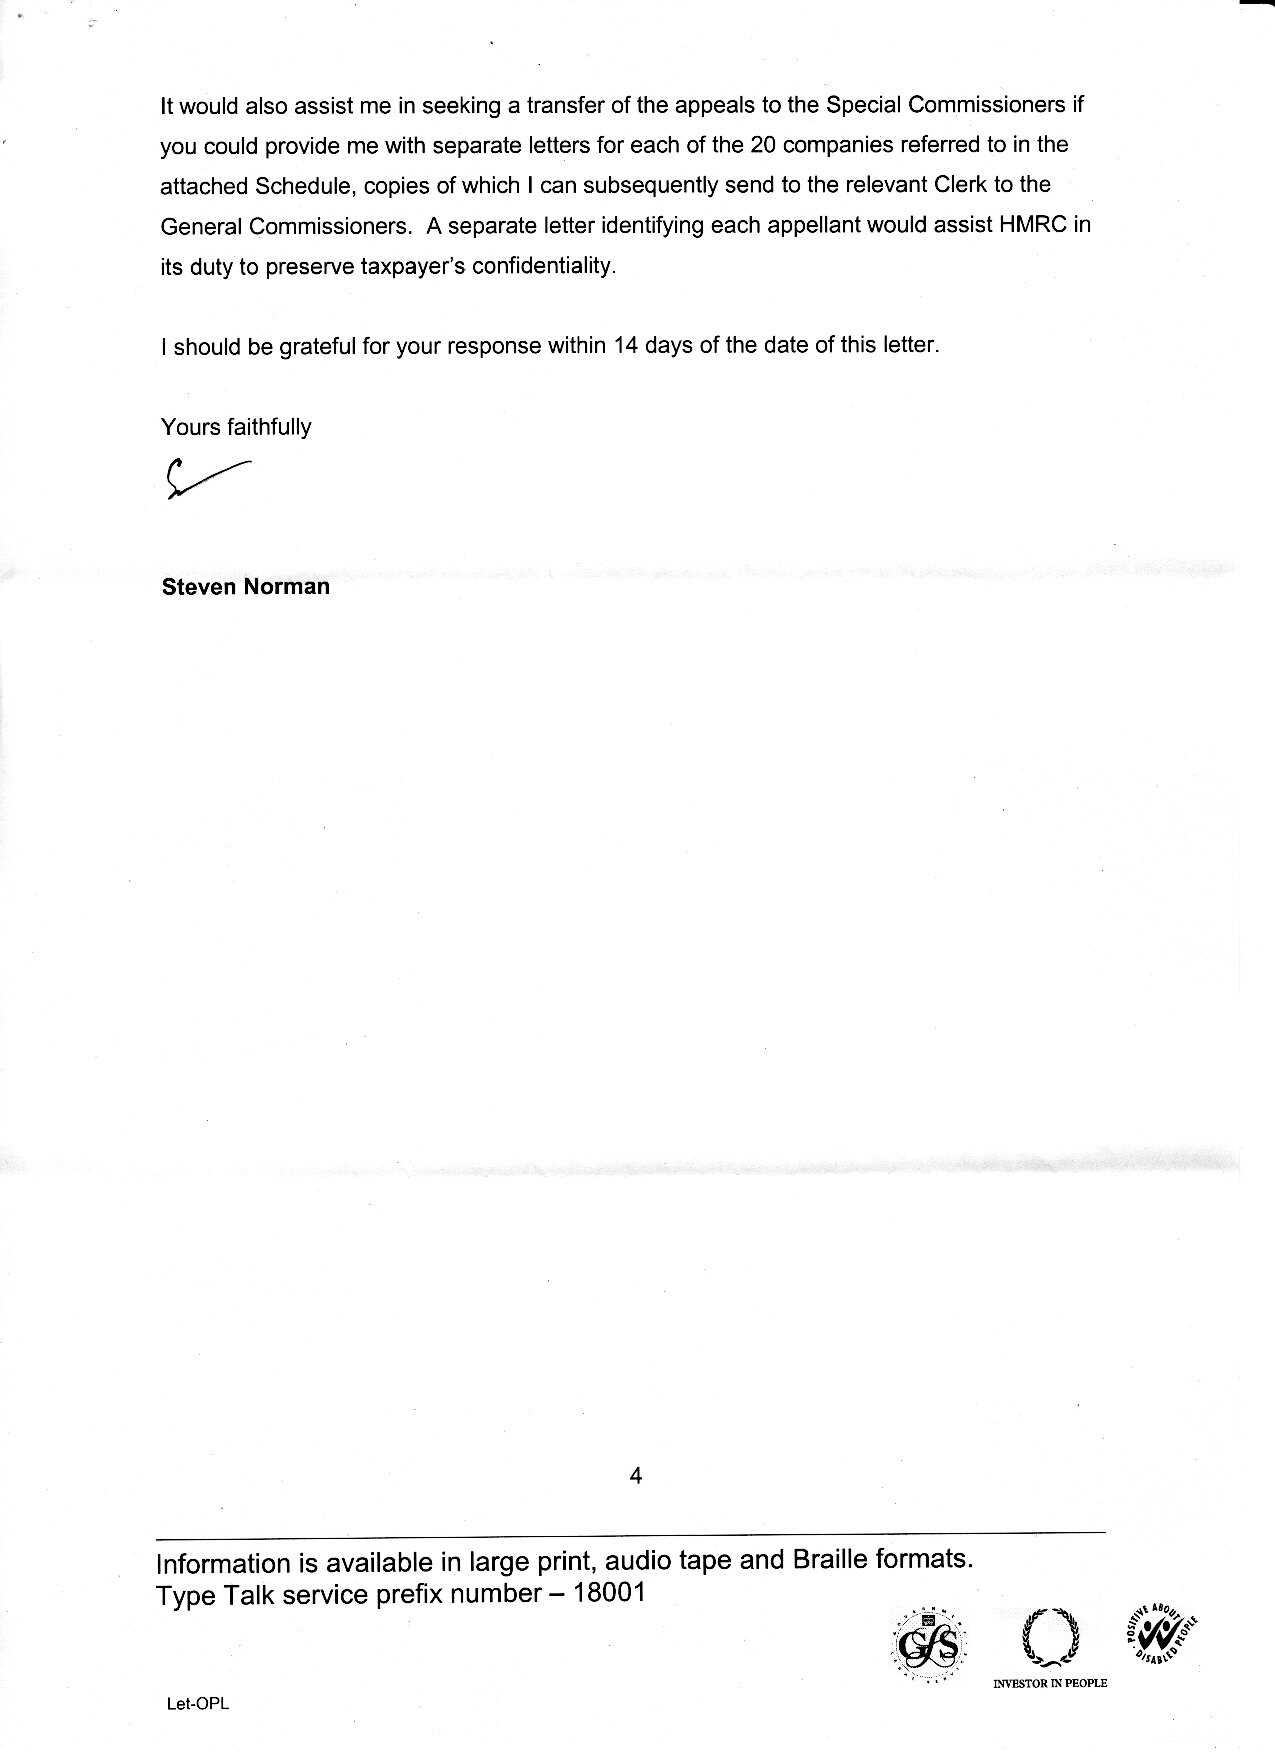 Letter from HMRC